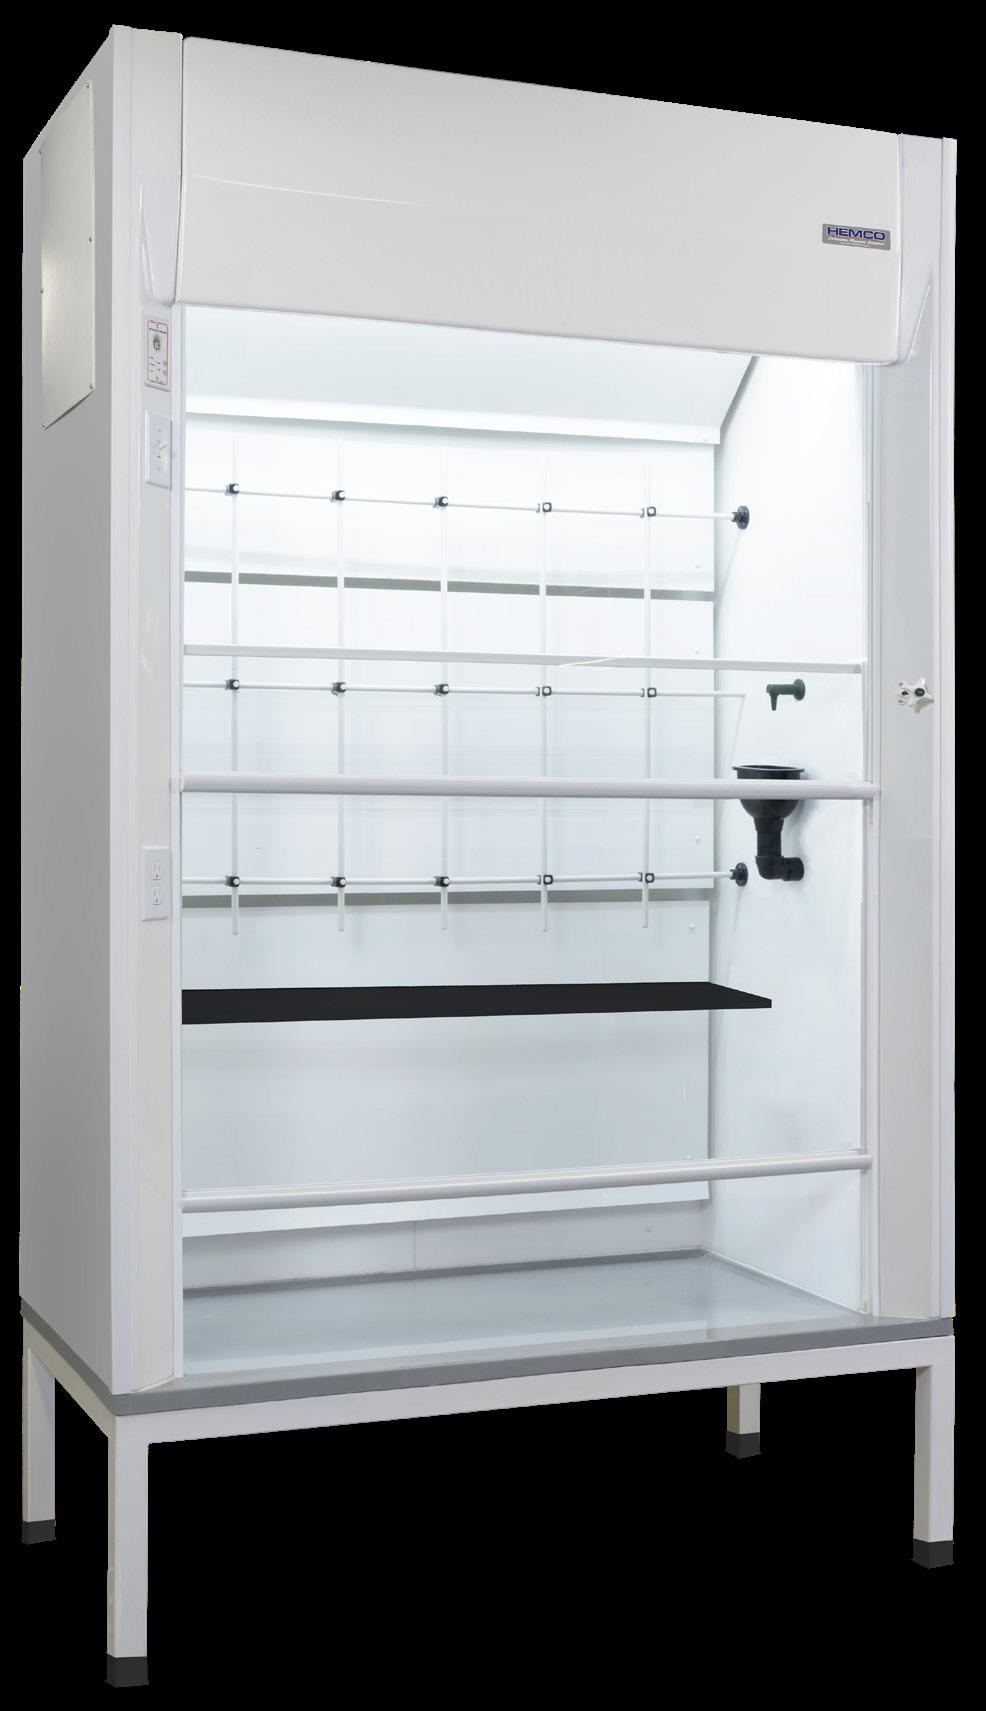 R LE FM Distillation Fume Hoods UniFlow LE FM Floor Mounted (Walk-In) Hoods are ideally suited for synthesis, distillation & other rack type operations where tall apparatus is used or equipment is